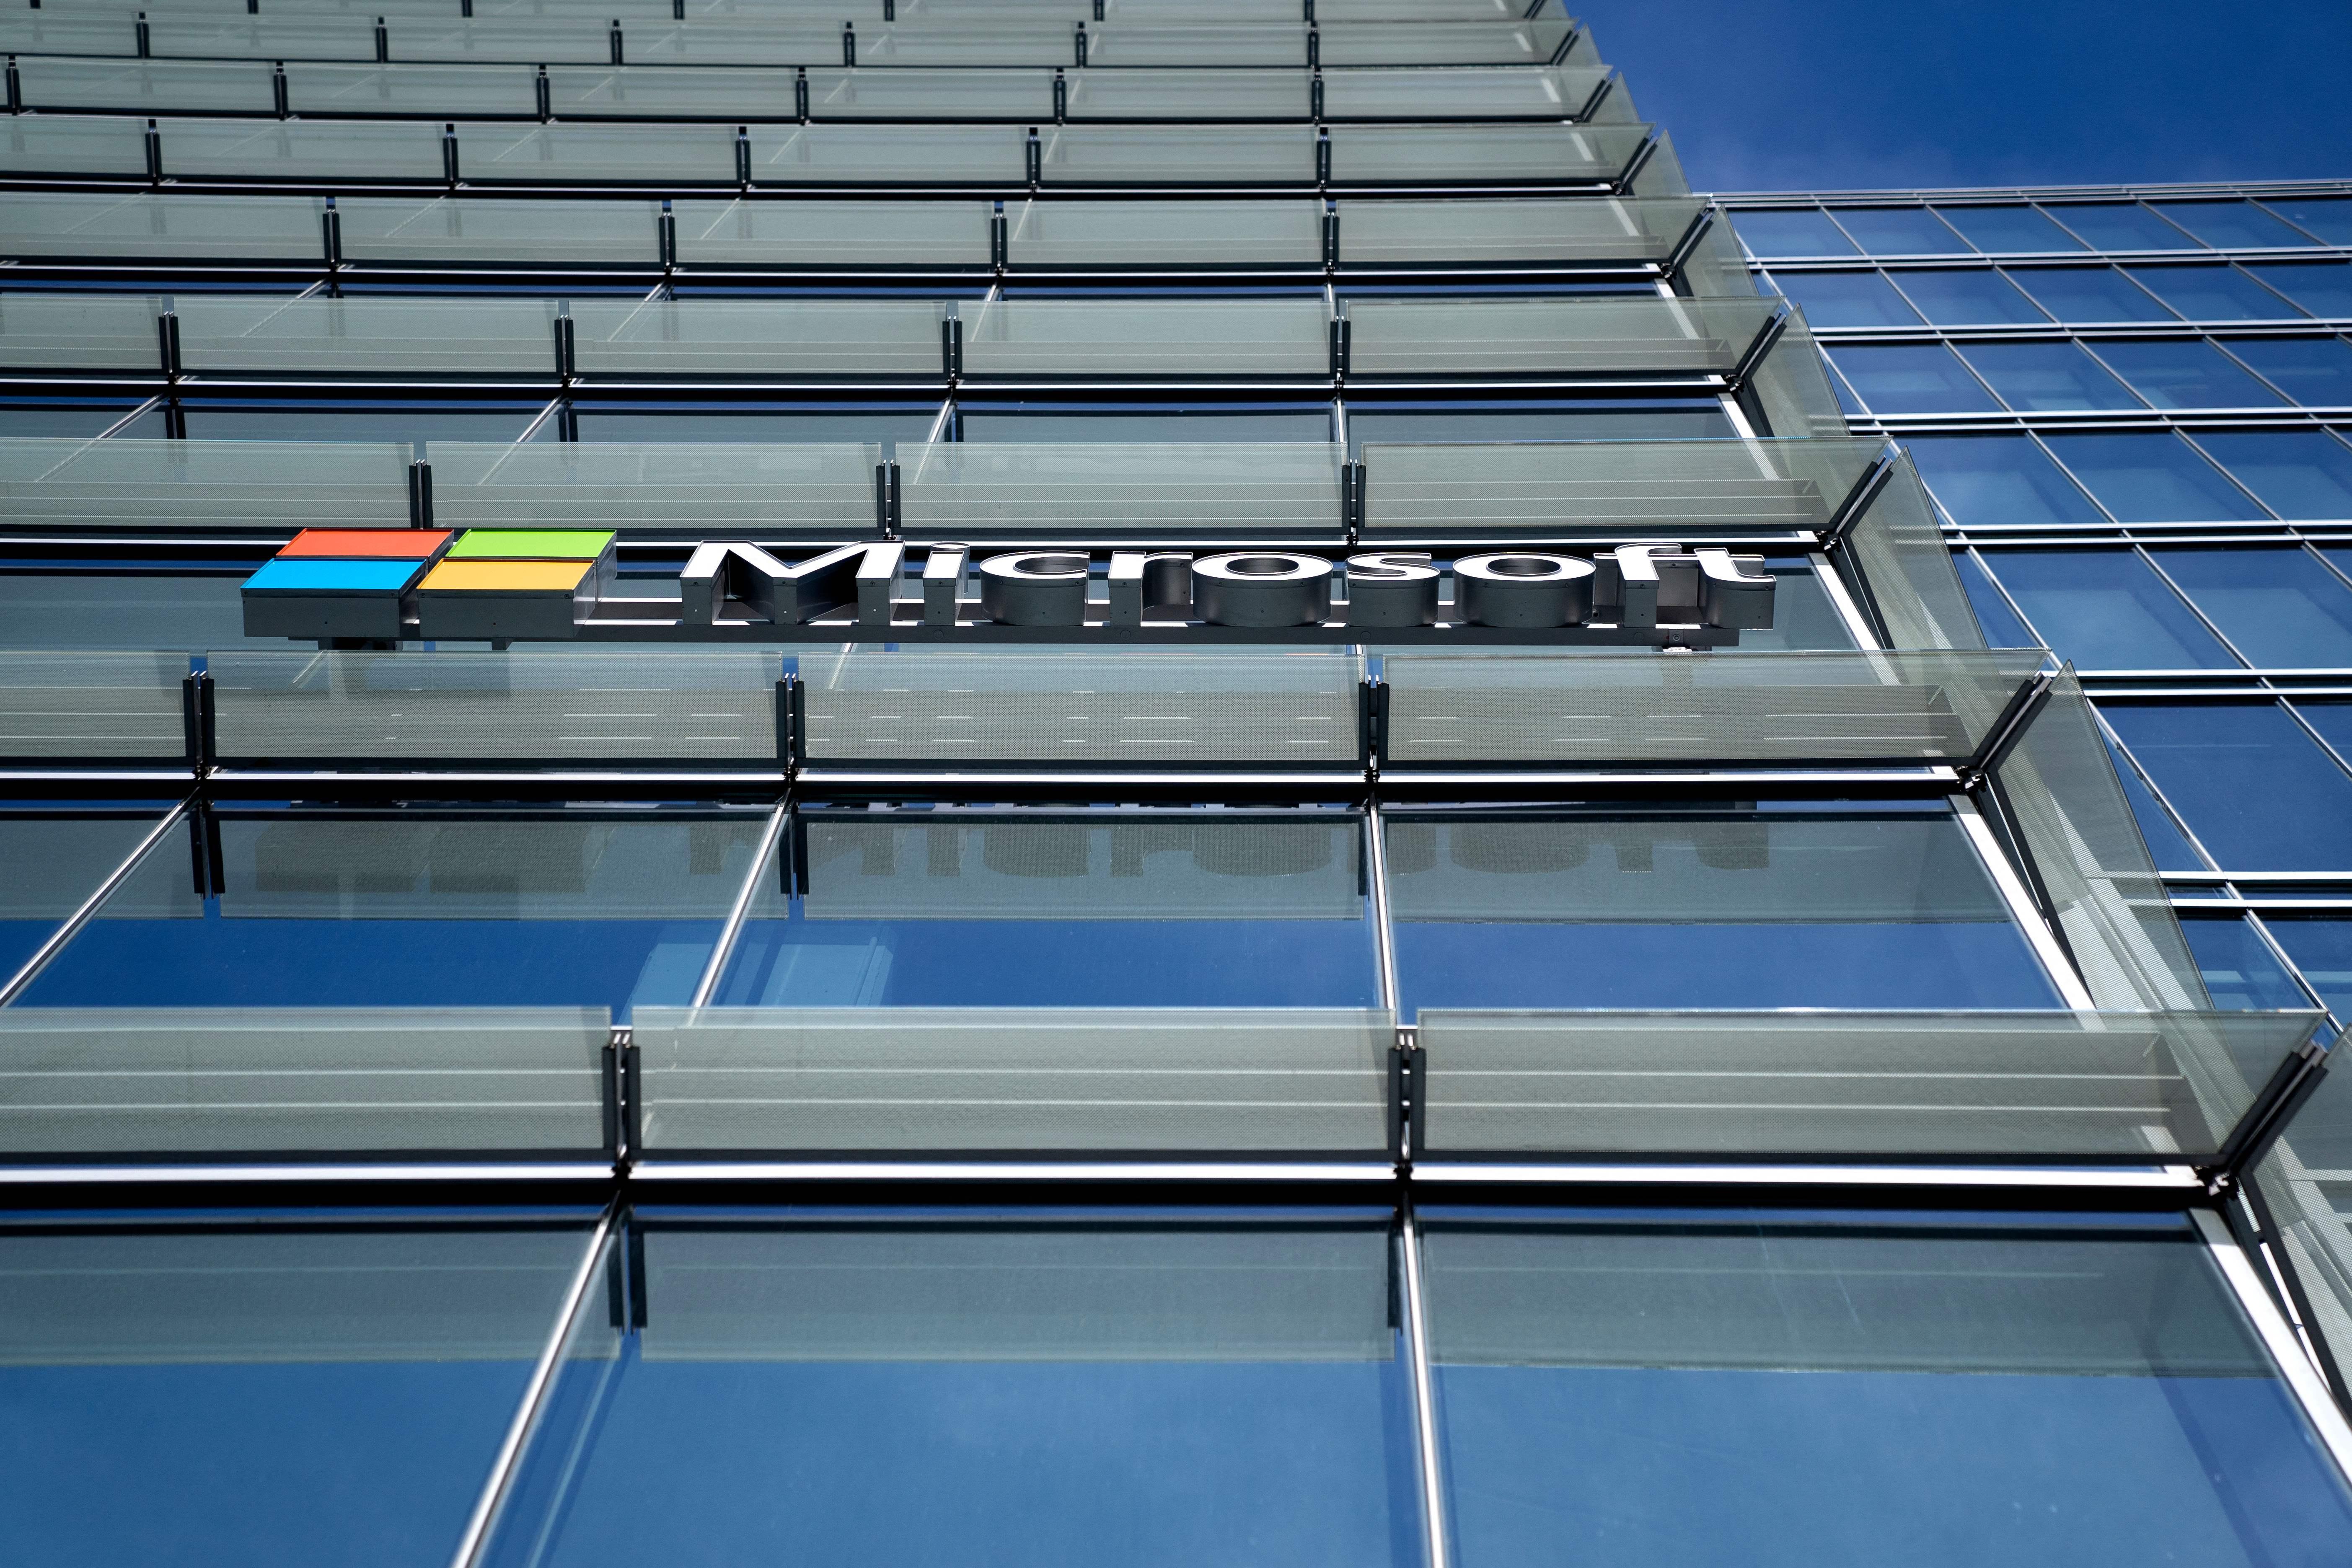 The Microsoft logo is displayed on an office building in Washington, DC, on February 15, 2023. - Retail sales in the United States rebounded in January, government data showed Wednesday, logging the biggest gain since early 2021 as policymakers watch for signs that consumer spending is cooling in the longer run. (Photo by Stefani Reynolds / AFP) (Photo by STEFANI REYNOLDS/AFP via Getty Images)